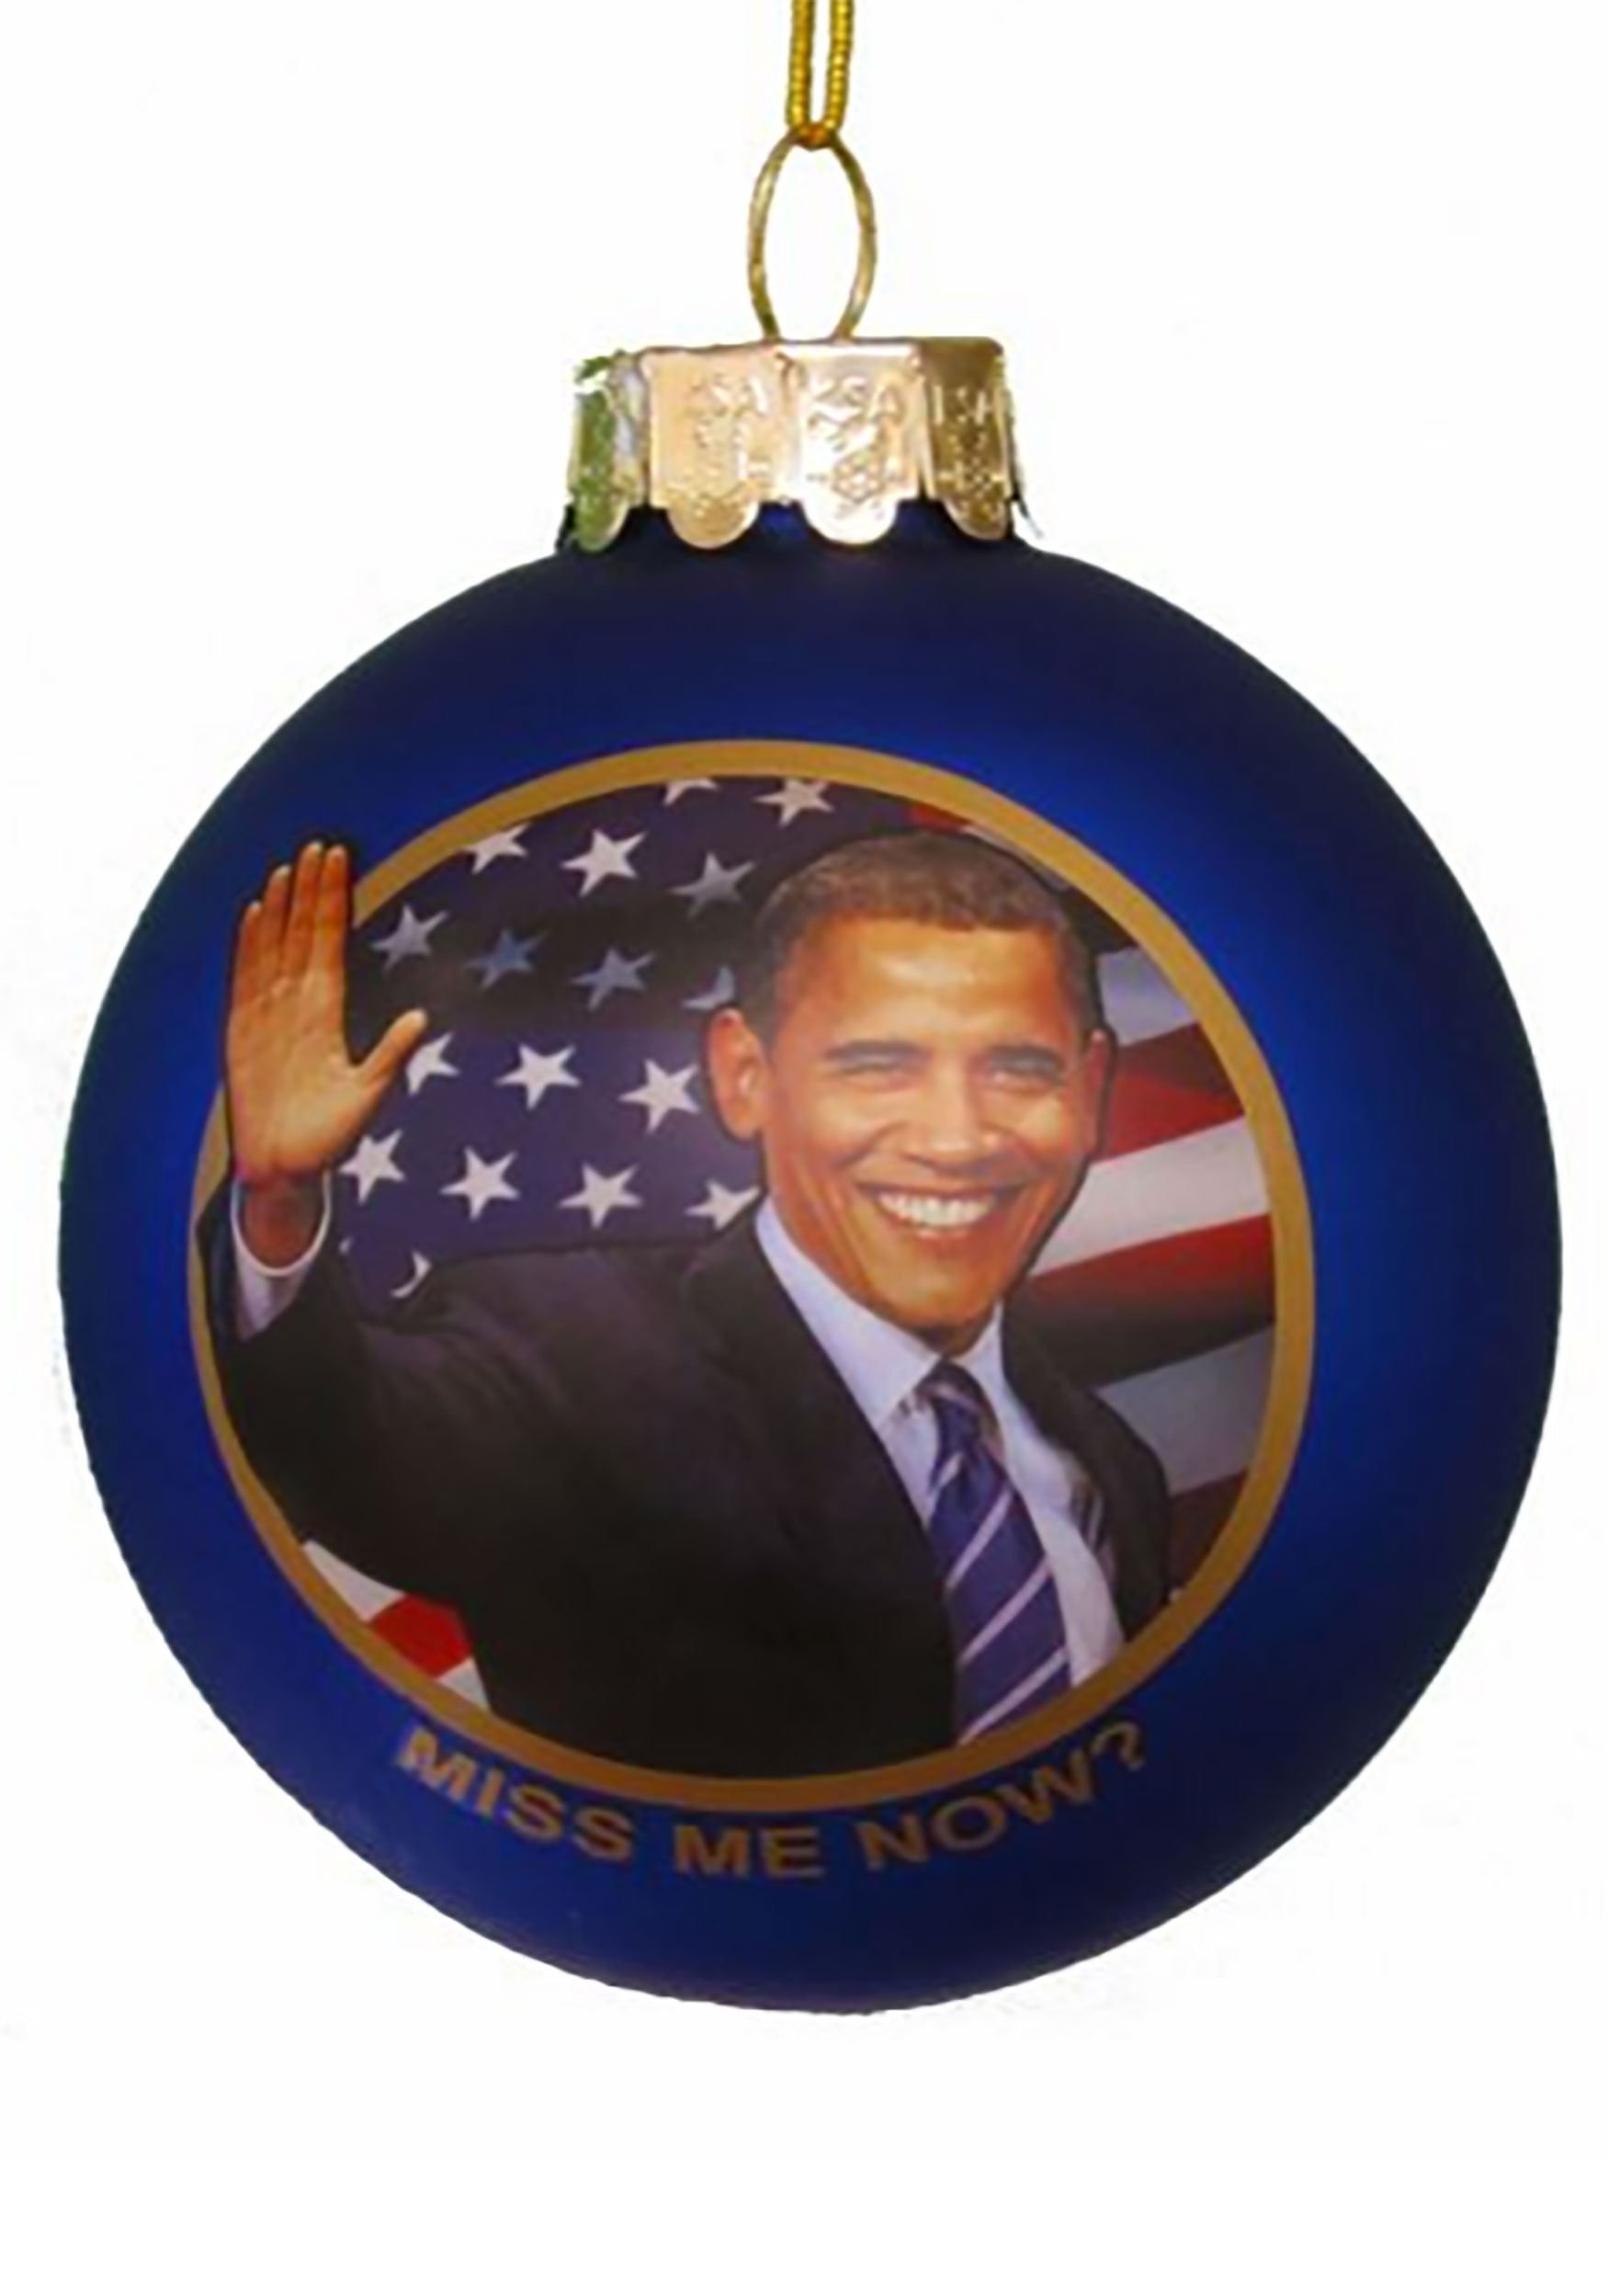 Miss Me Now? Obama Ornament